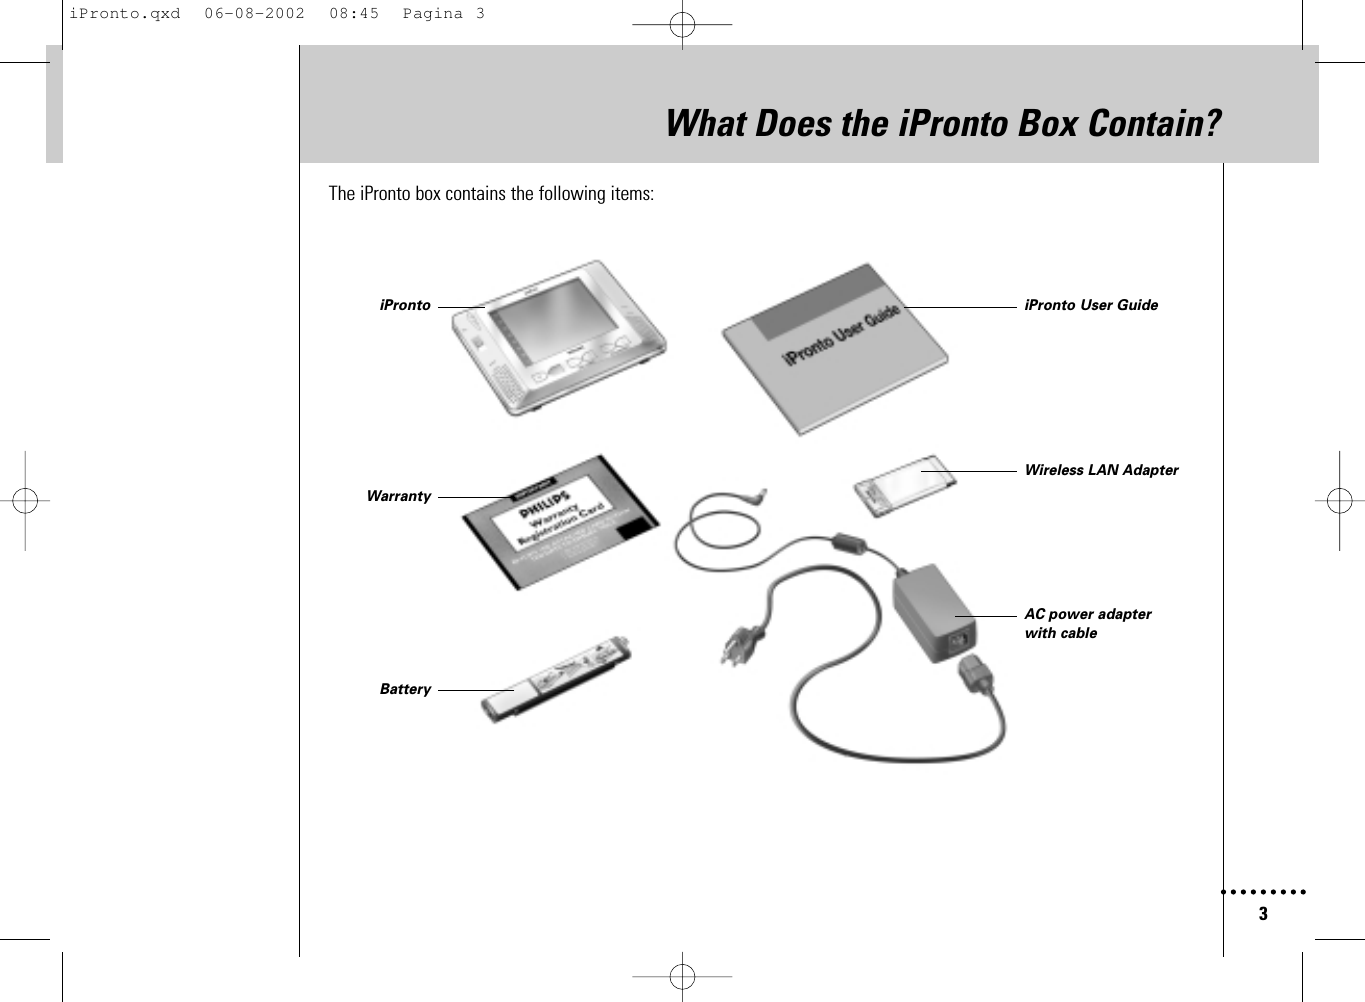 3What Does the iPronto Box Contain?The iPronto box contains the following items:WarrantyBatteryiPronto iPronto User GuideWireless LAN AdapterAC power adapterwith cableiPronto.qxd  06-08-2002  08:45  Pagina 3